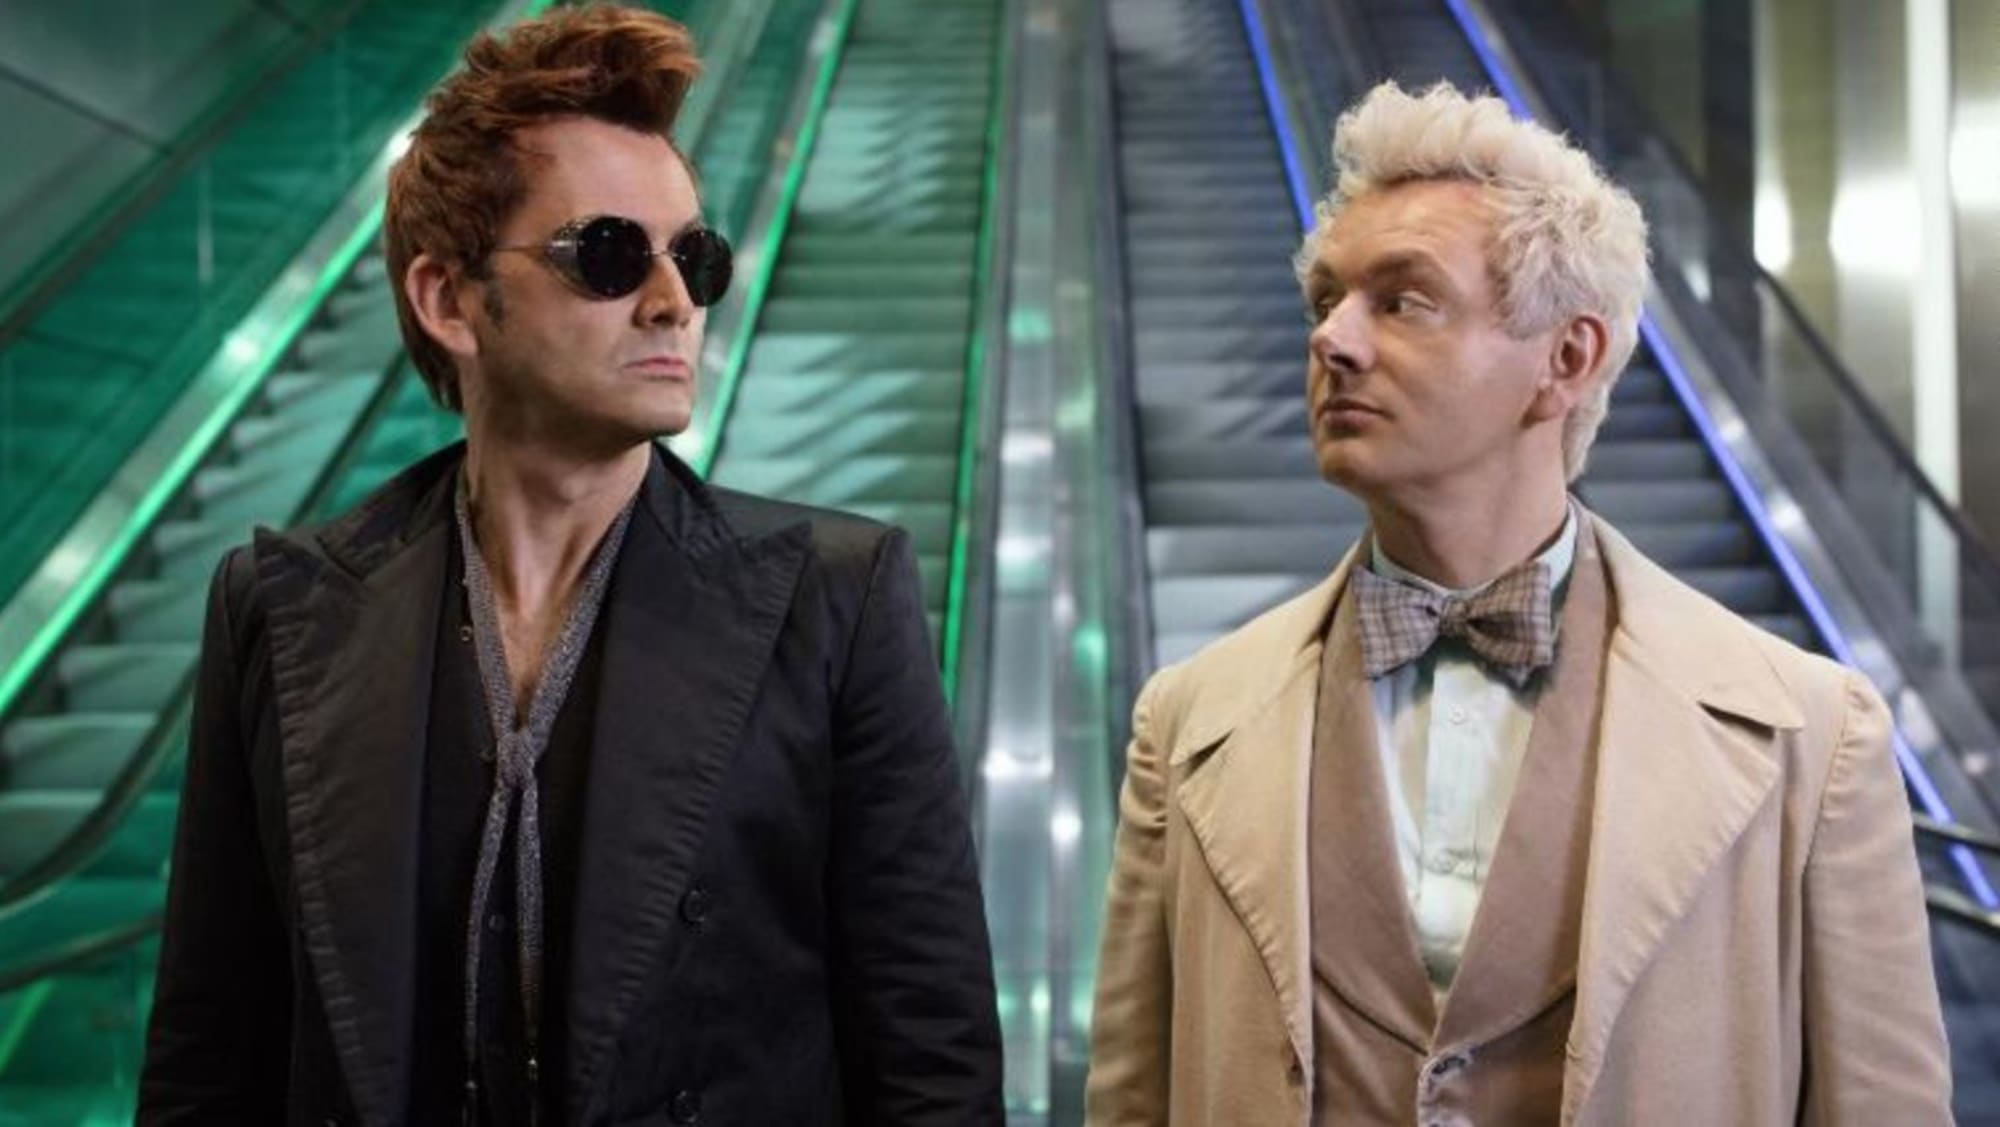 Watch Good Omens Online With Free Prime Video Trial Now Streaming 2809